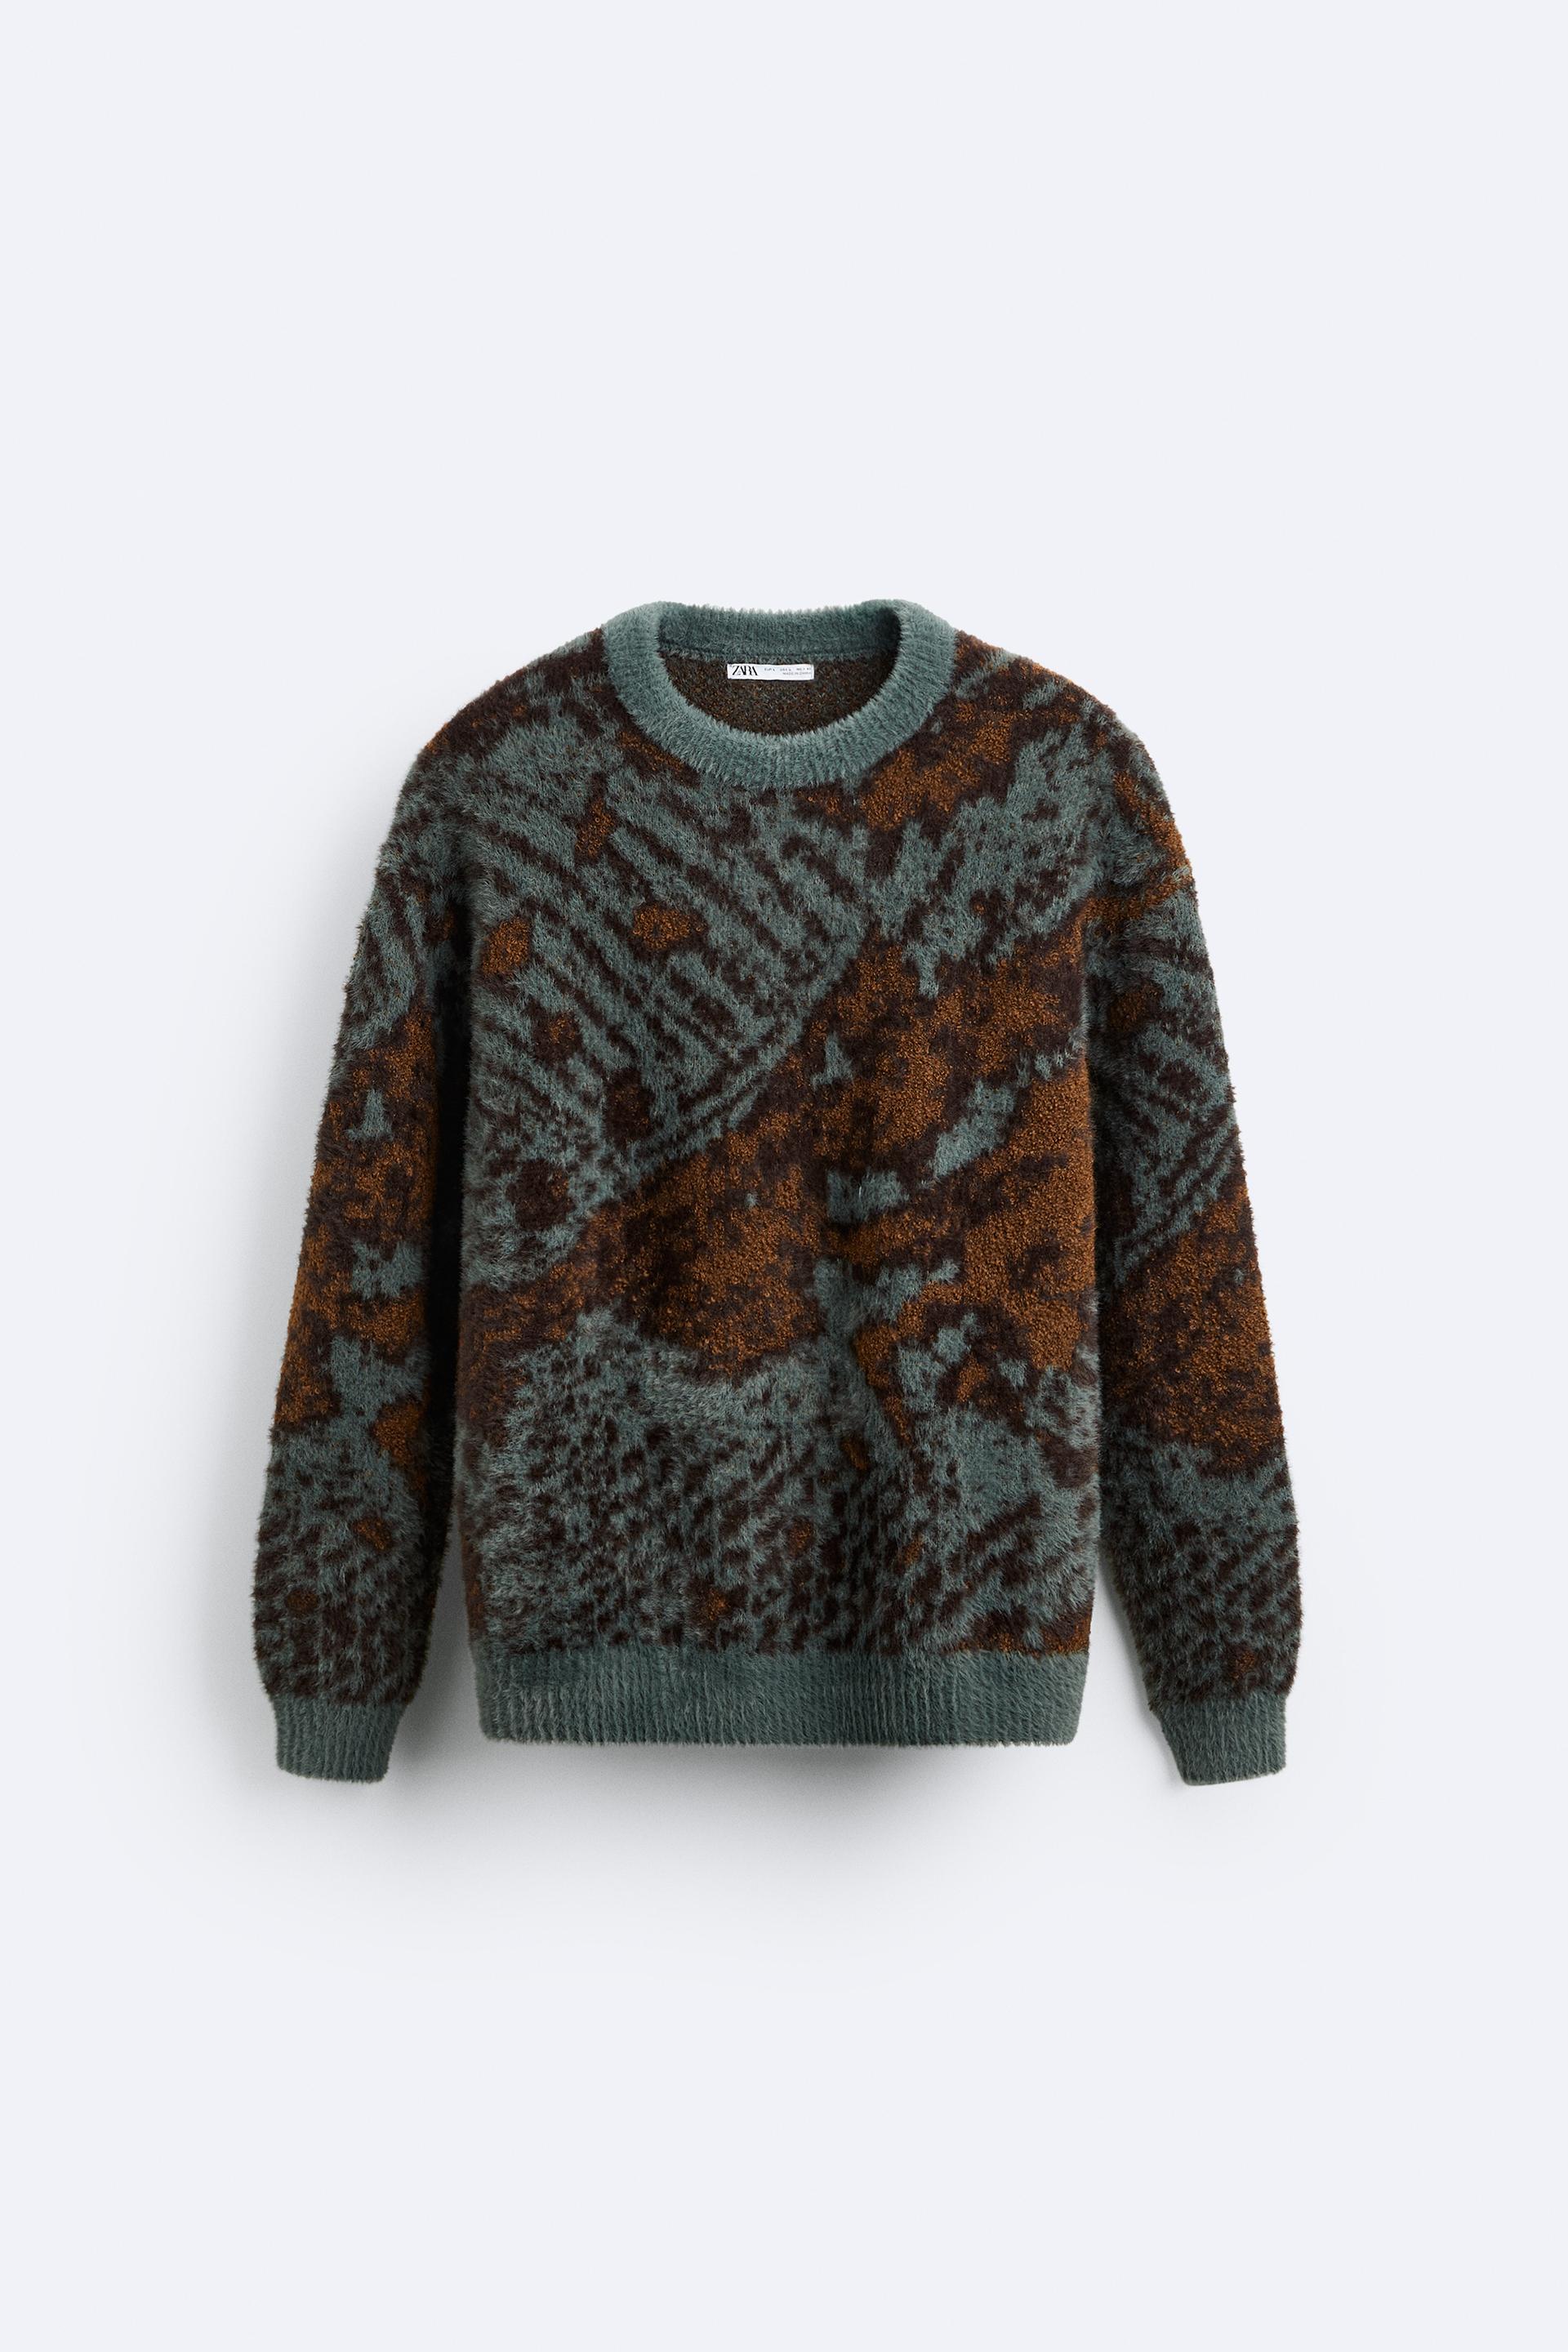 ABSTRACT JACQUARD SWEATER - Anthracite Gray